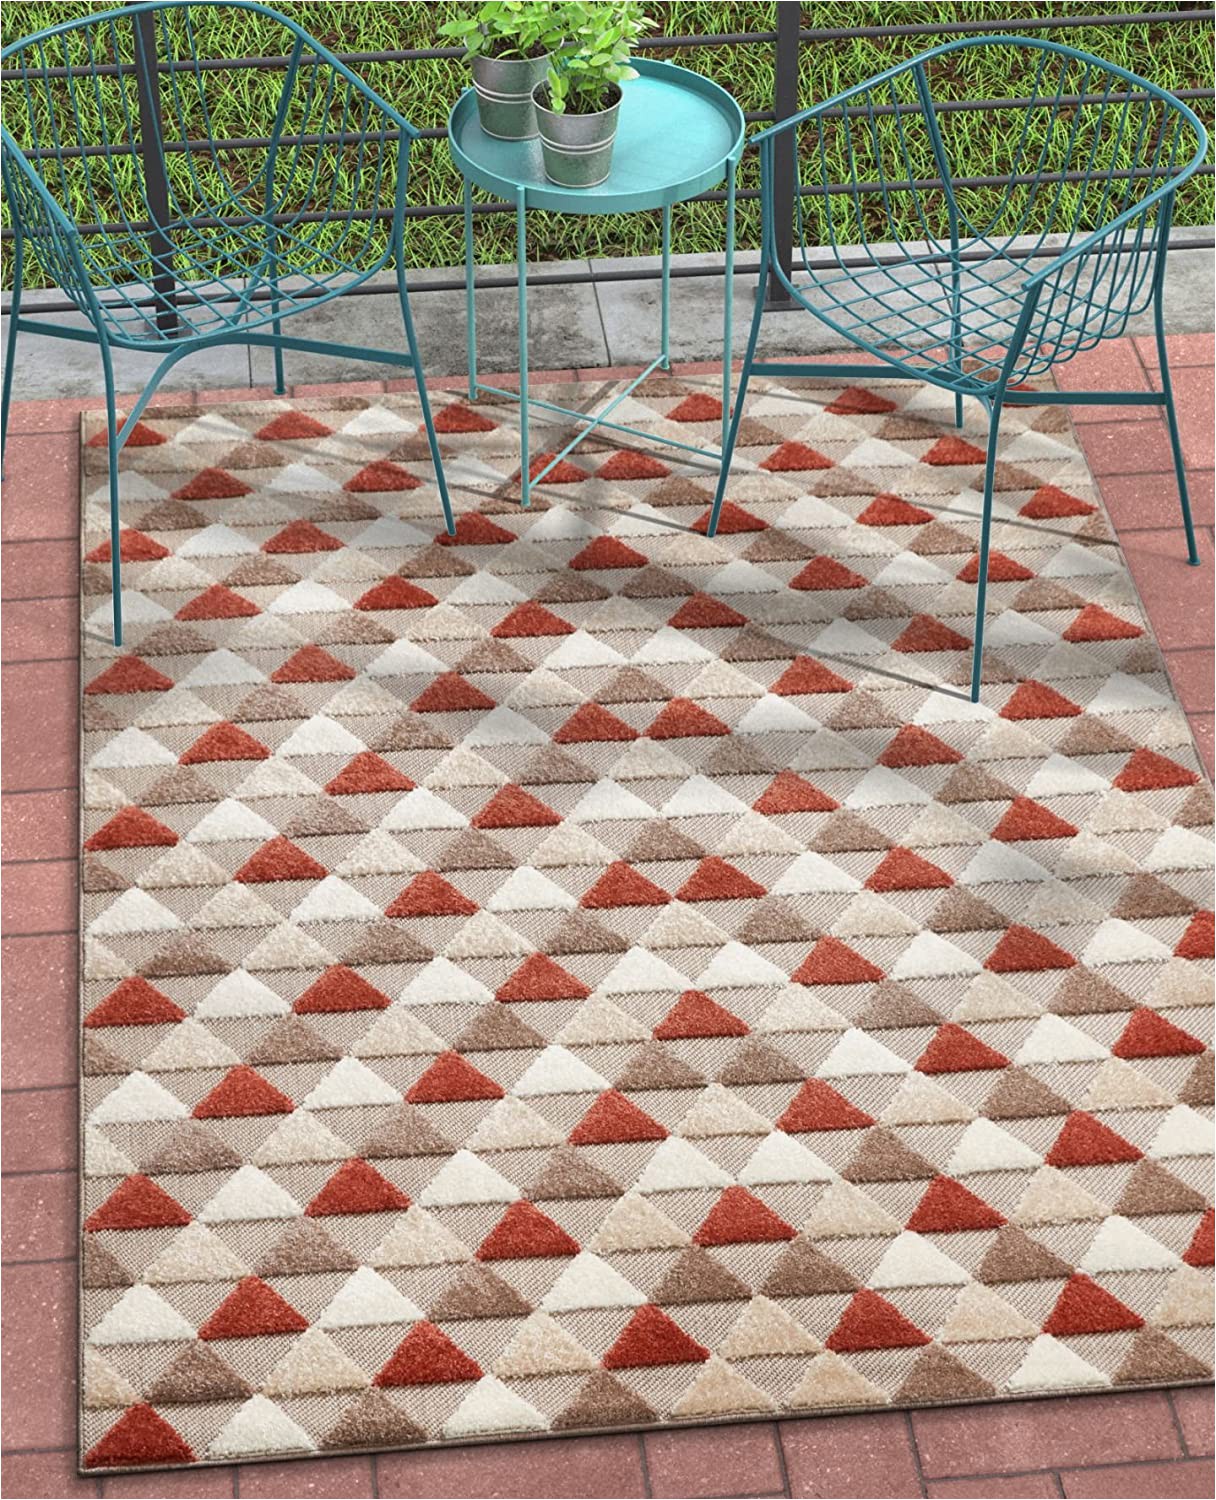 Area Rugs for High Traffic areas Well Woven Miami Red Indoor Outdoor Triangles area Rug 5×7 5 3" X 7 3" High Traffic Stain Resistant Modern Geometric Carpet